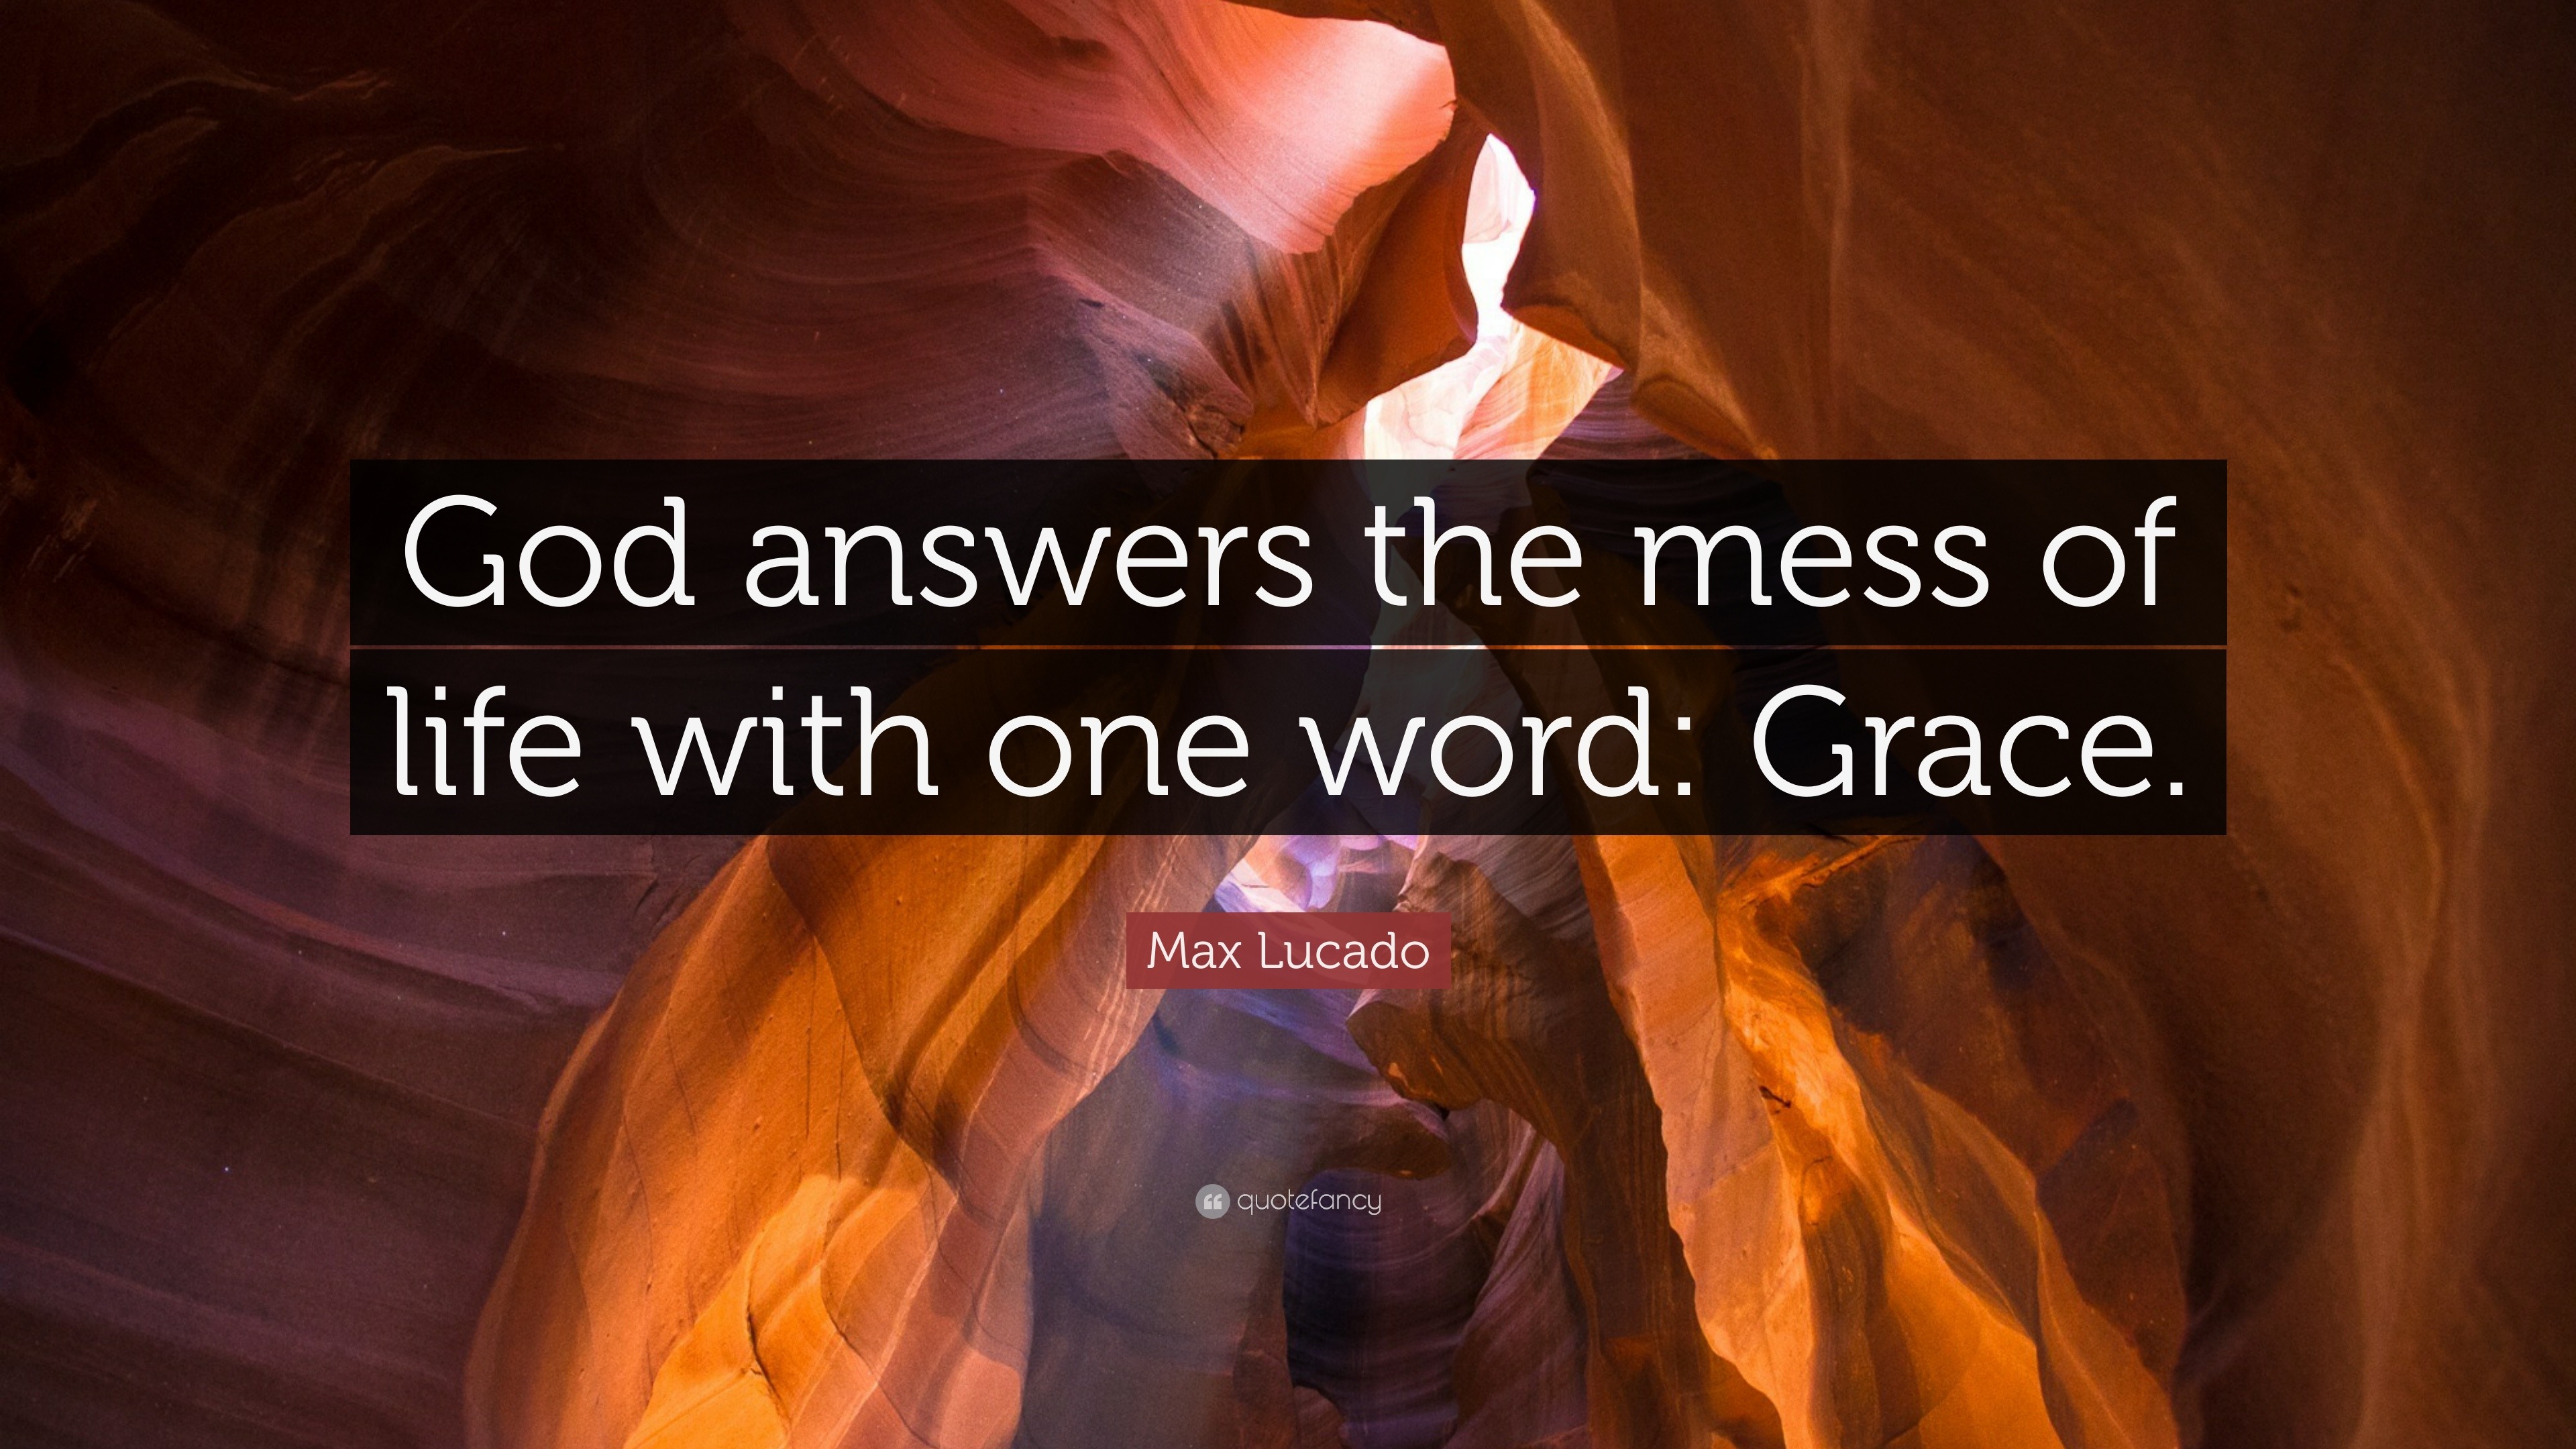 169520 Max Lucado Quote God answers the mess of life with one word Grace